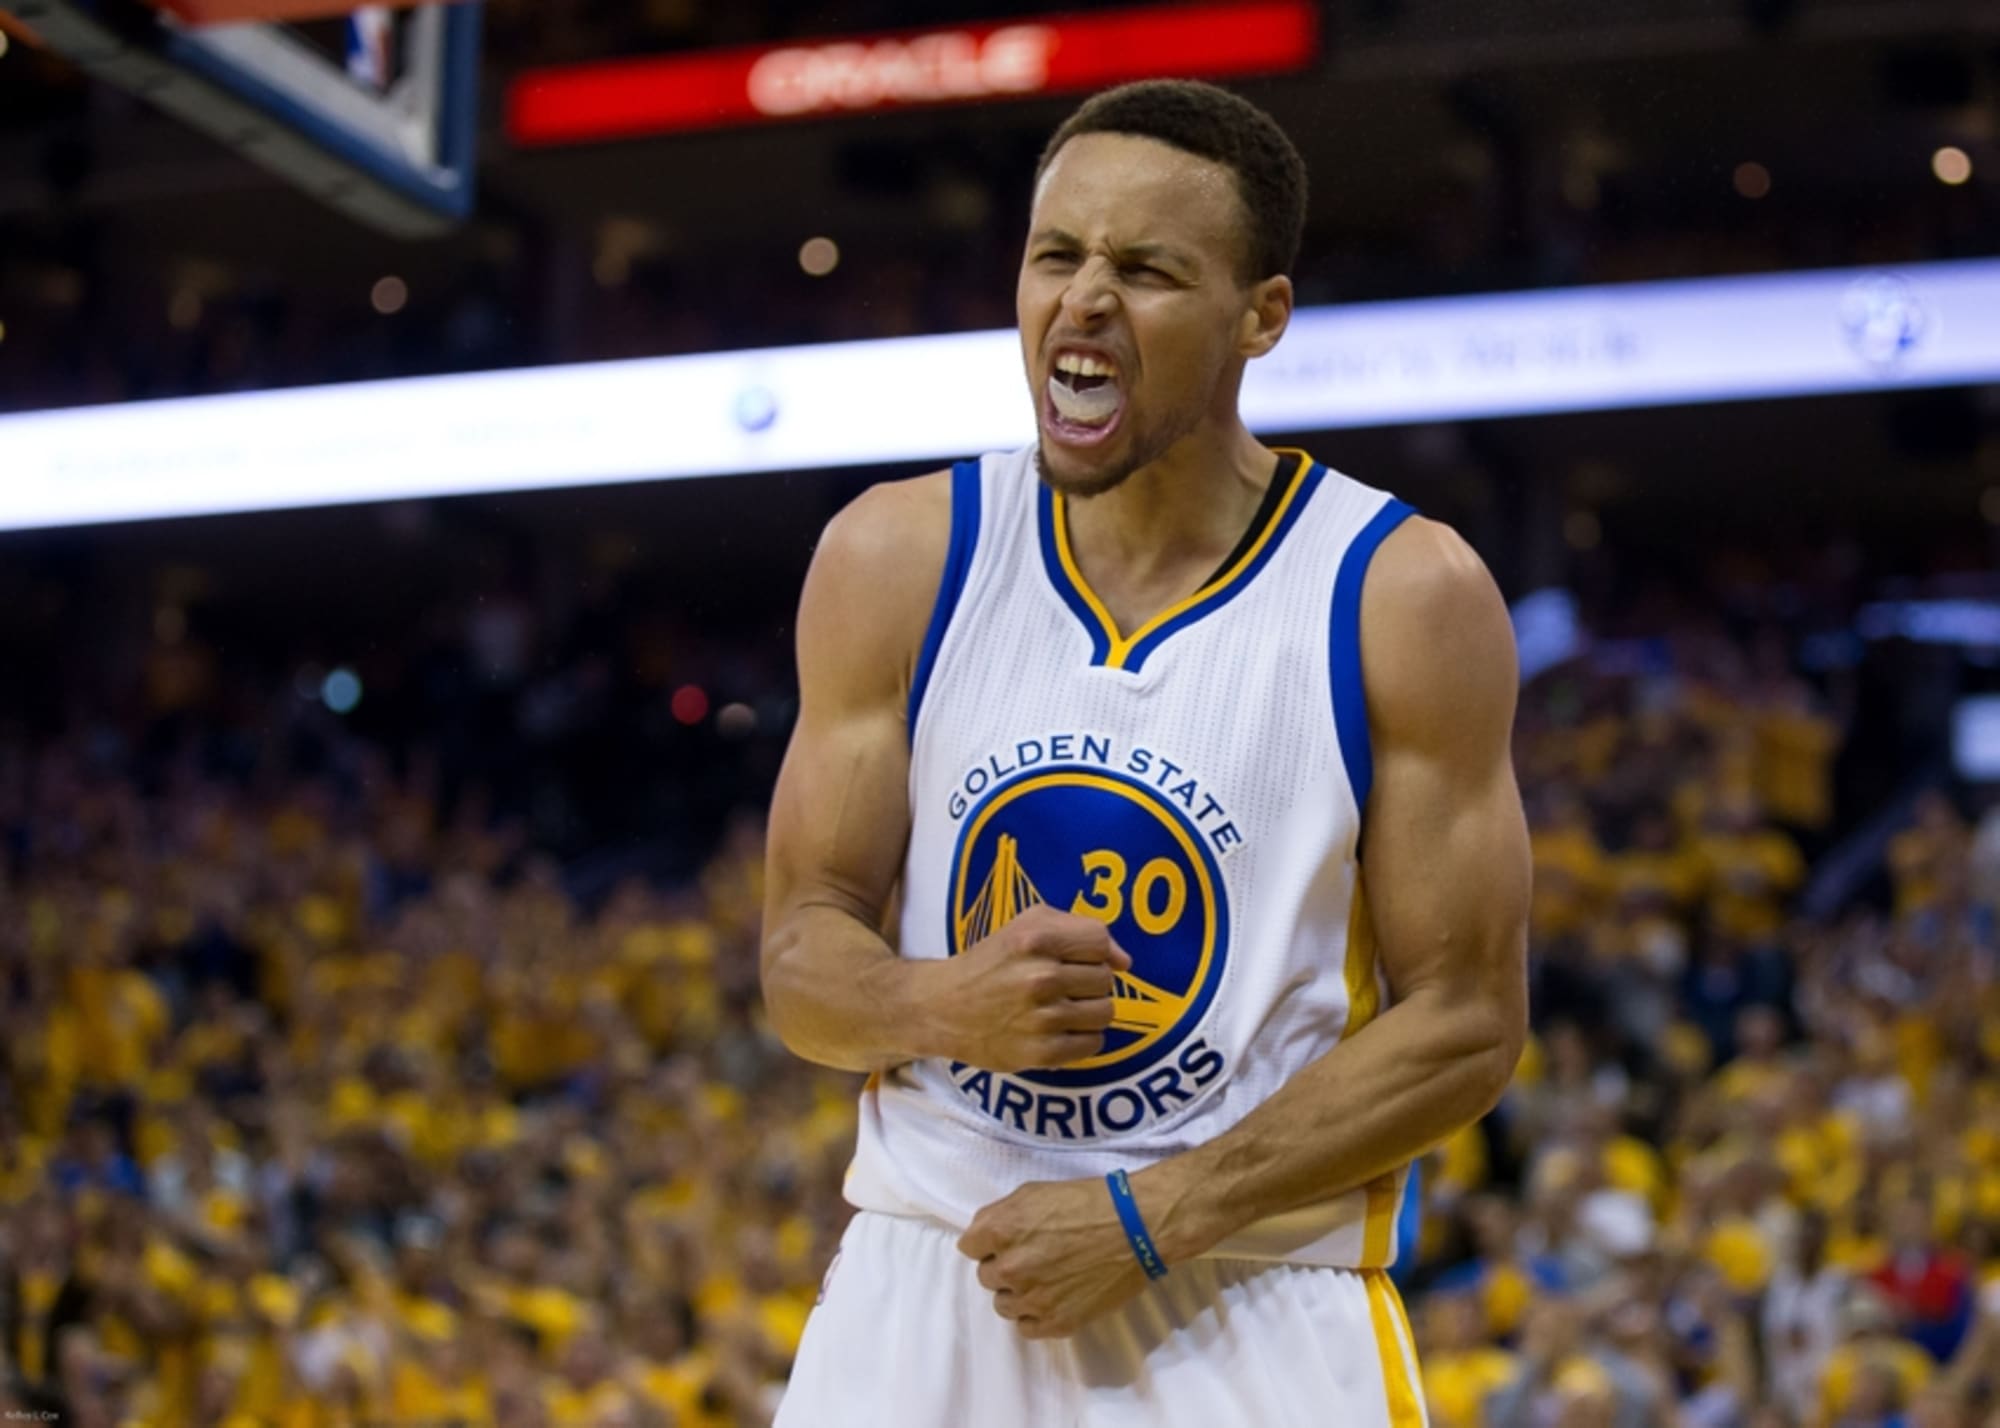 Warriors All-Star Rewind: Steph Curry wins 2015 3-point contest